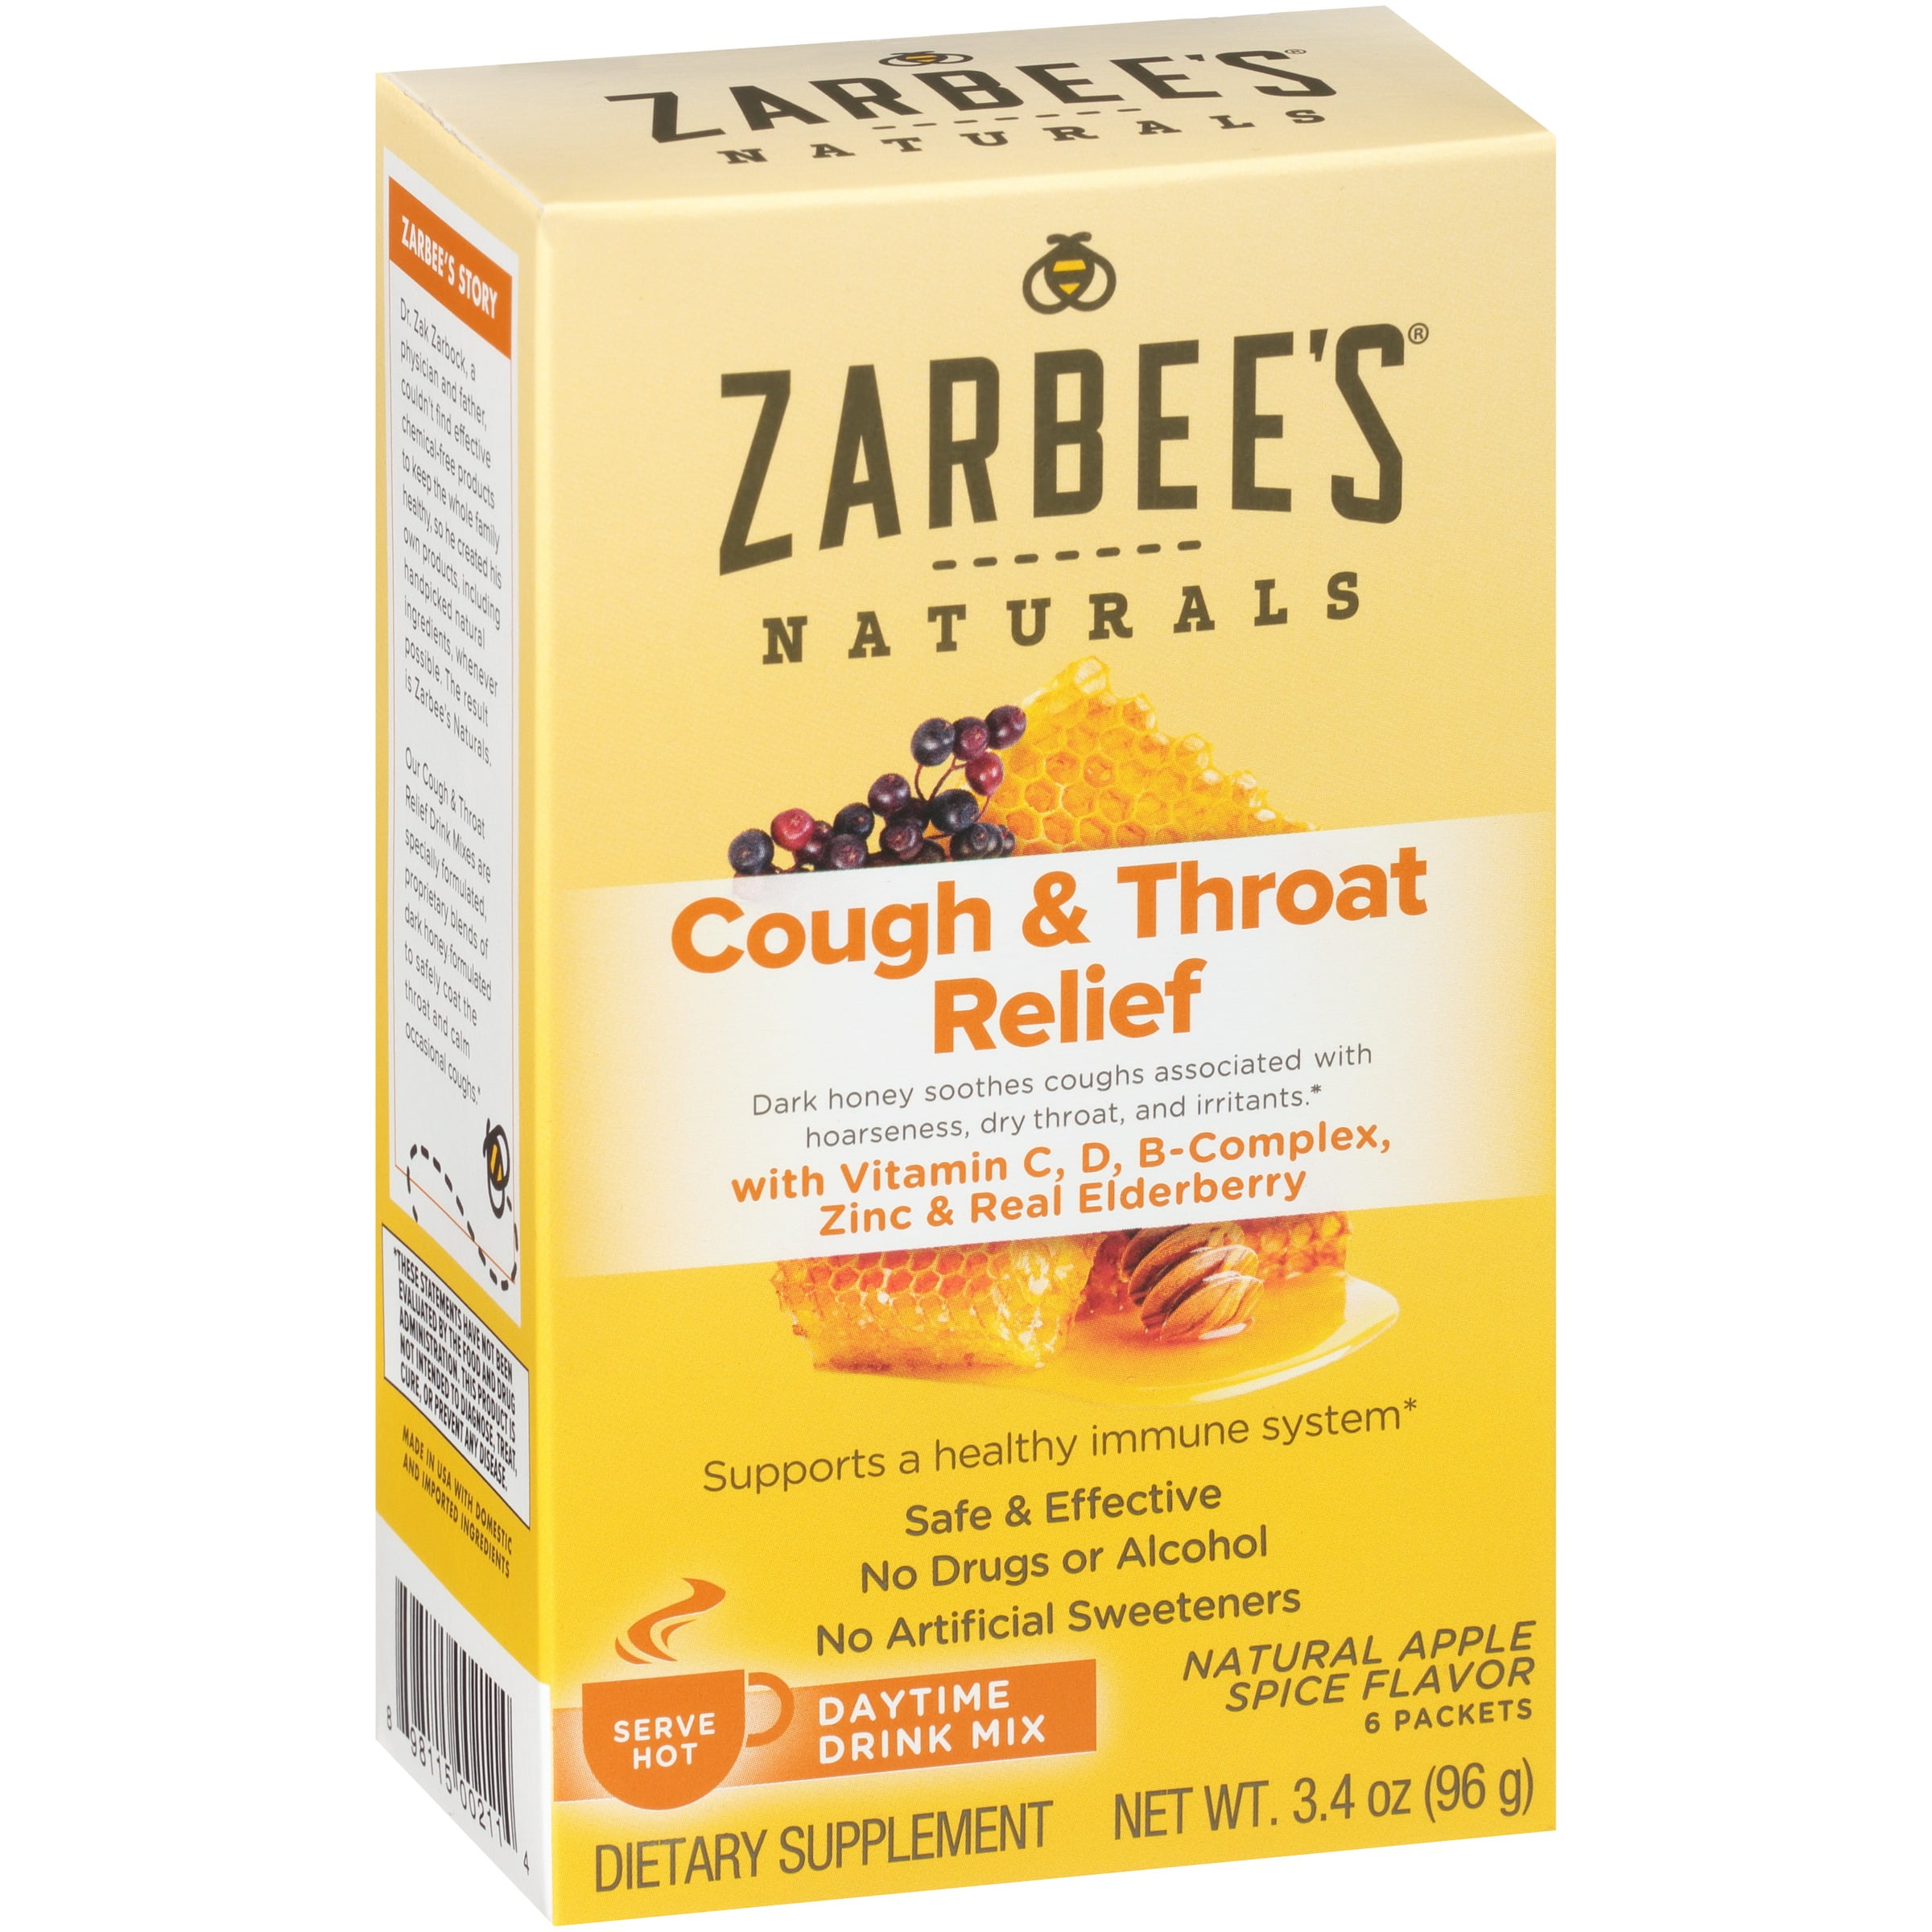 Throat cough. Dry cough Pills. Mixture from Dry cough. Dry cough Differential. Zarbee’s VITD.